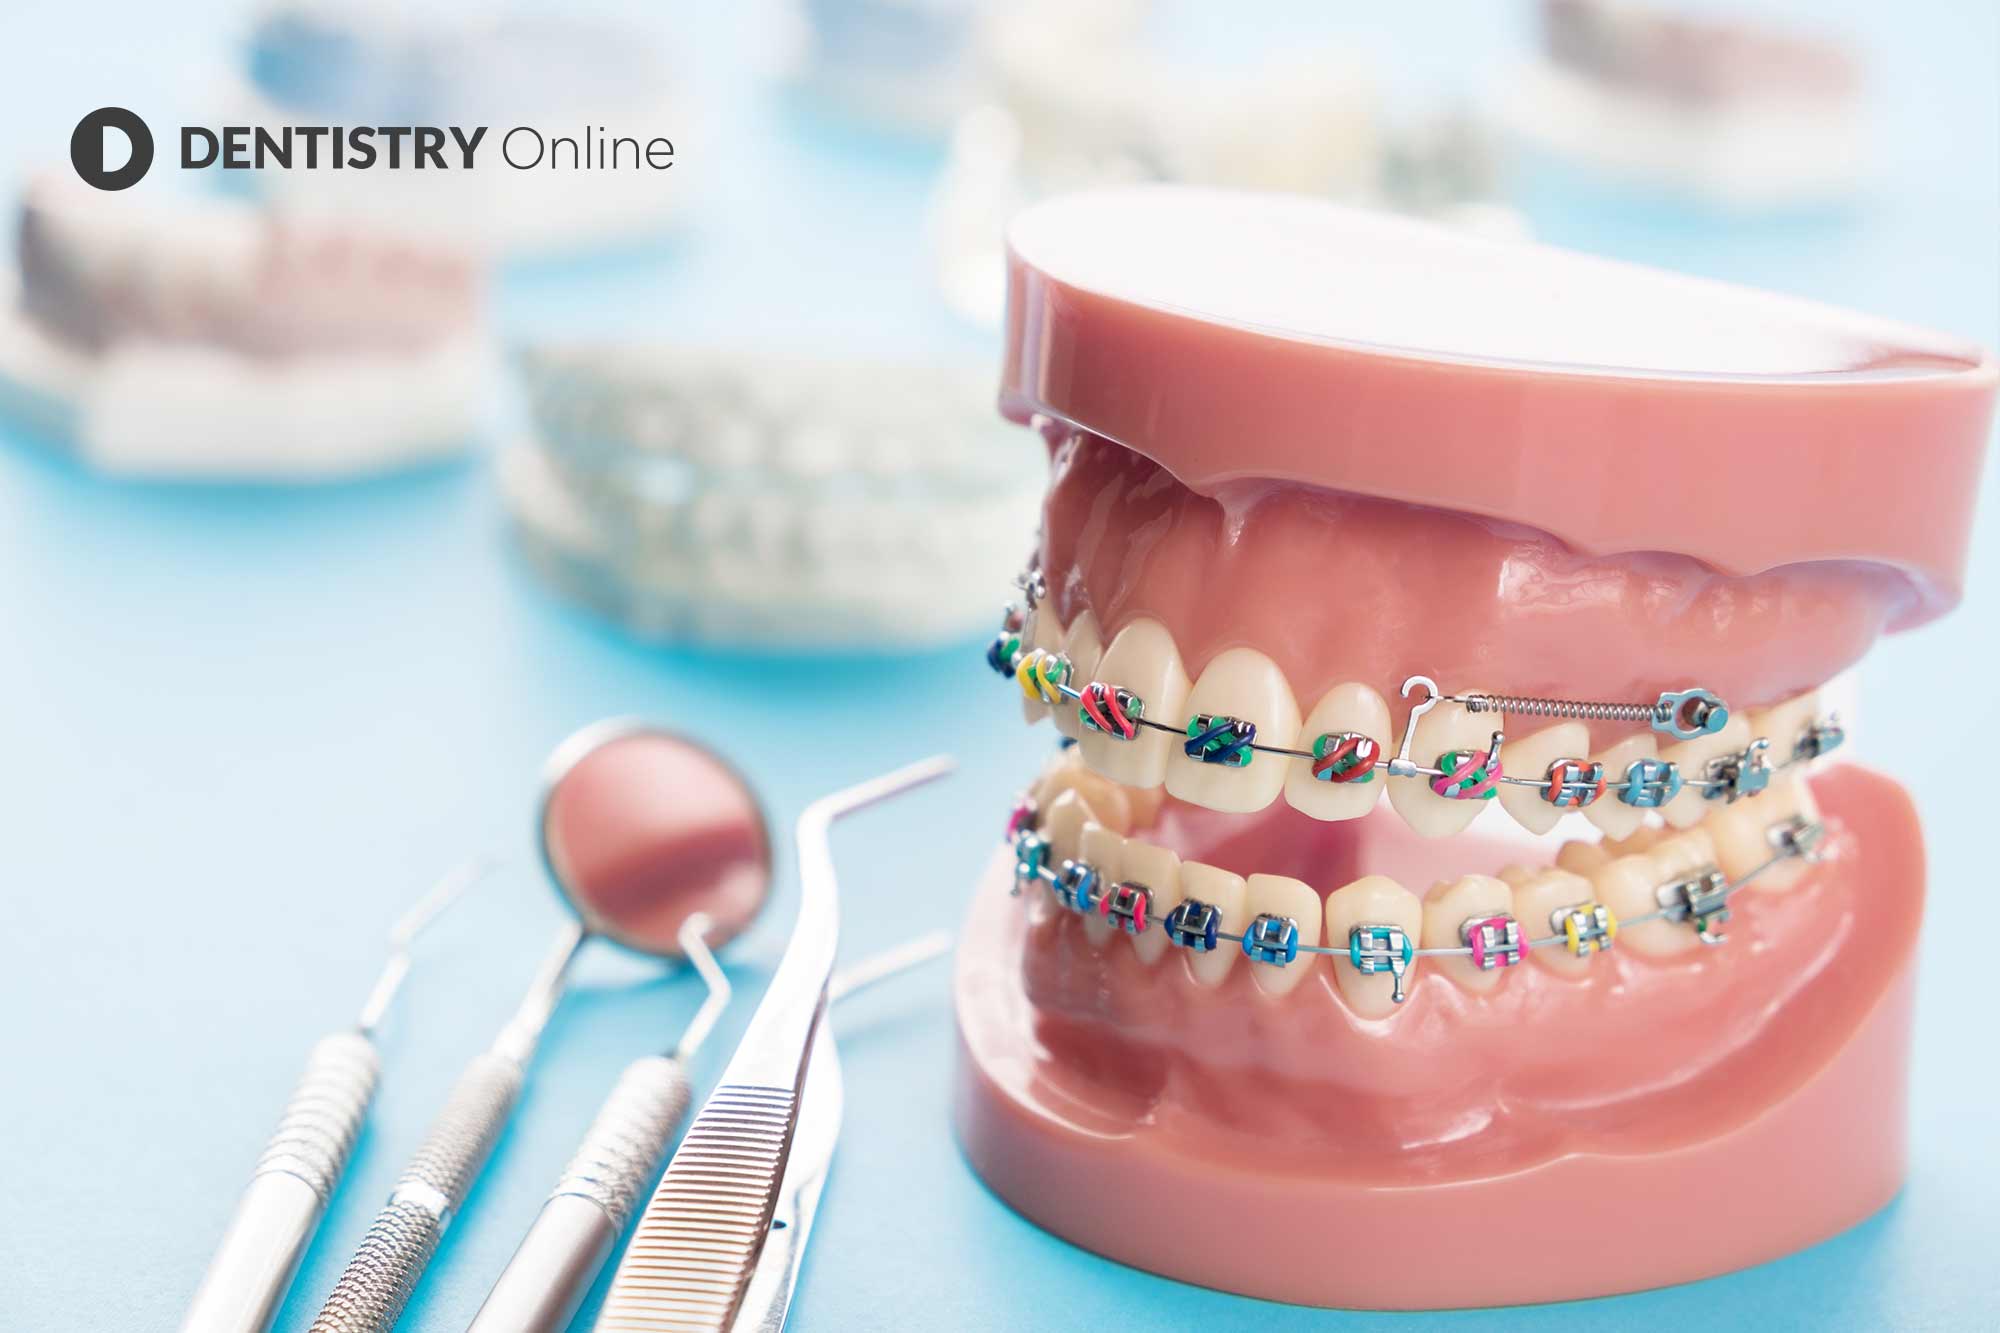 The orthodontic industry has always been highly competitive and probably more so now. Neil Hillyard looks at how to market effectively in COVID-19 times